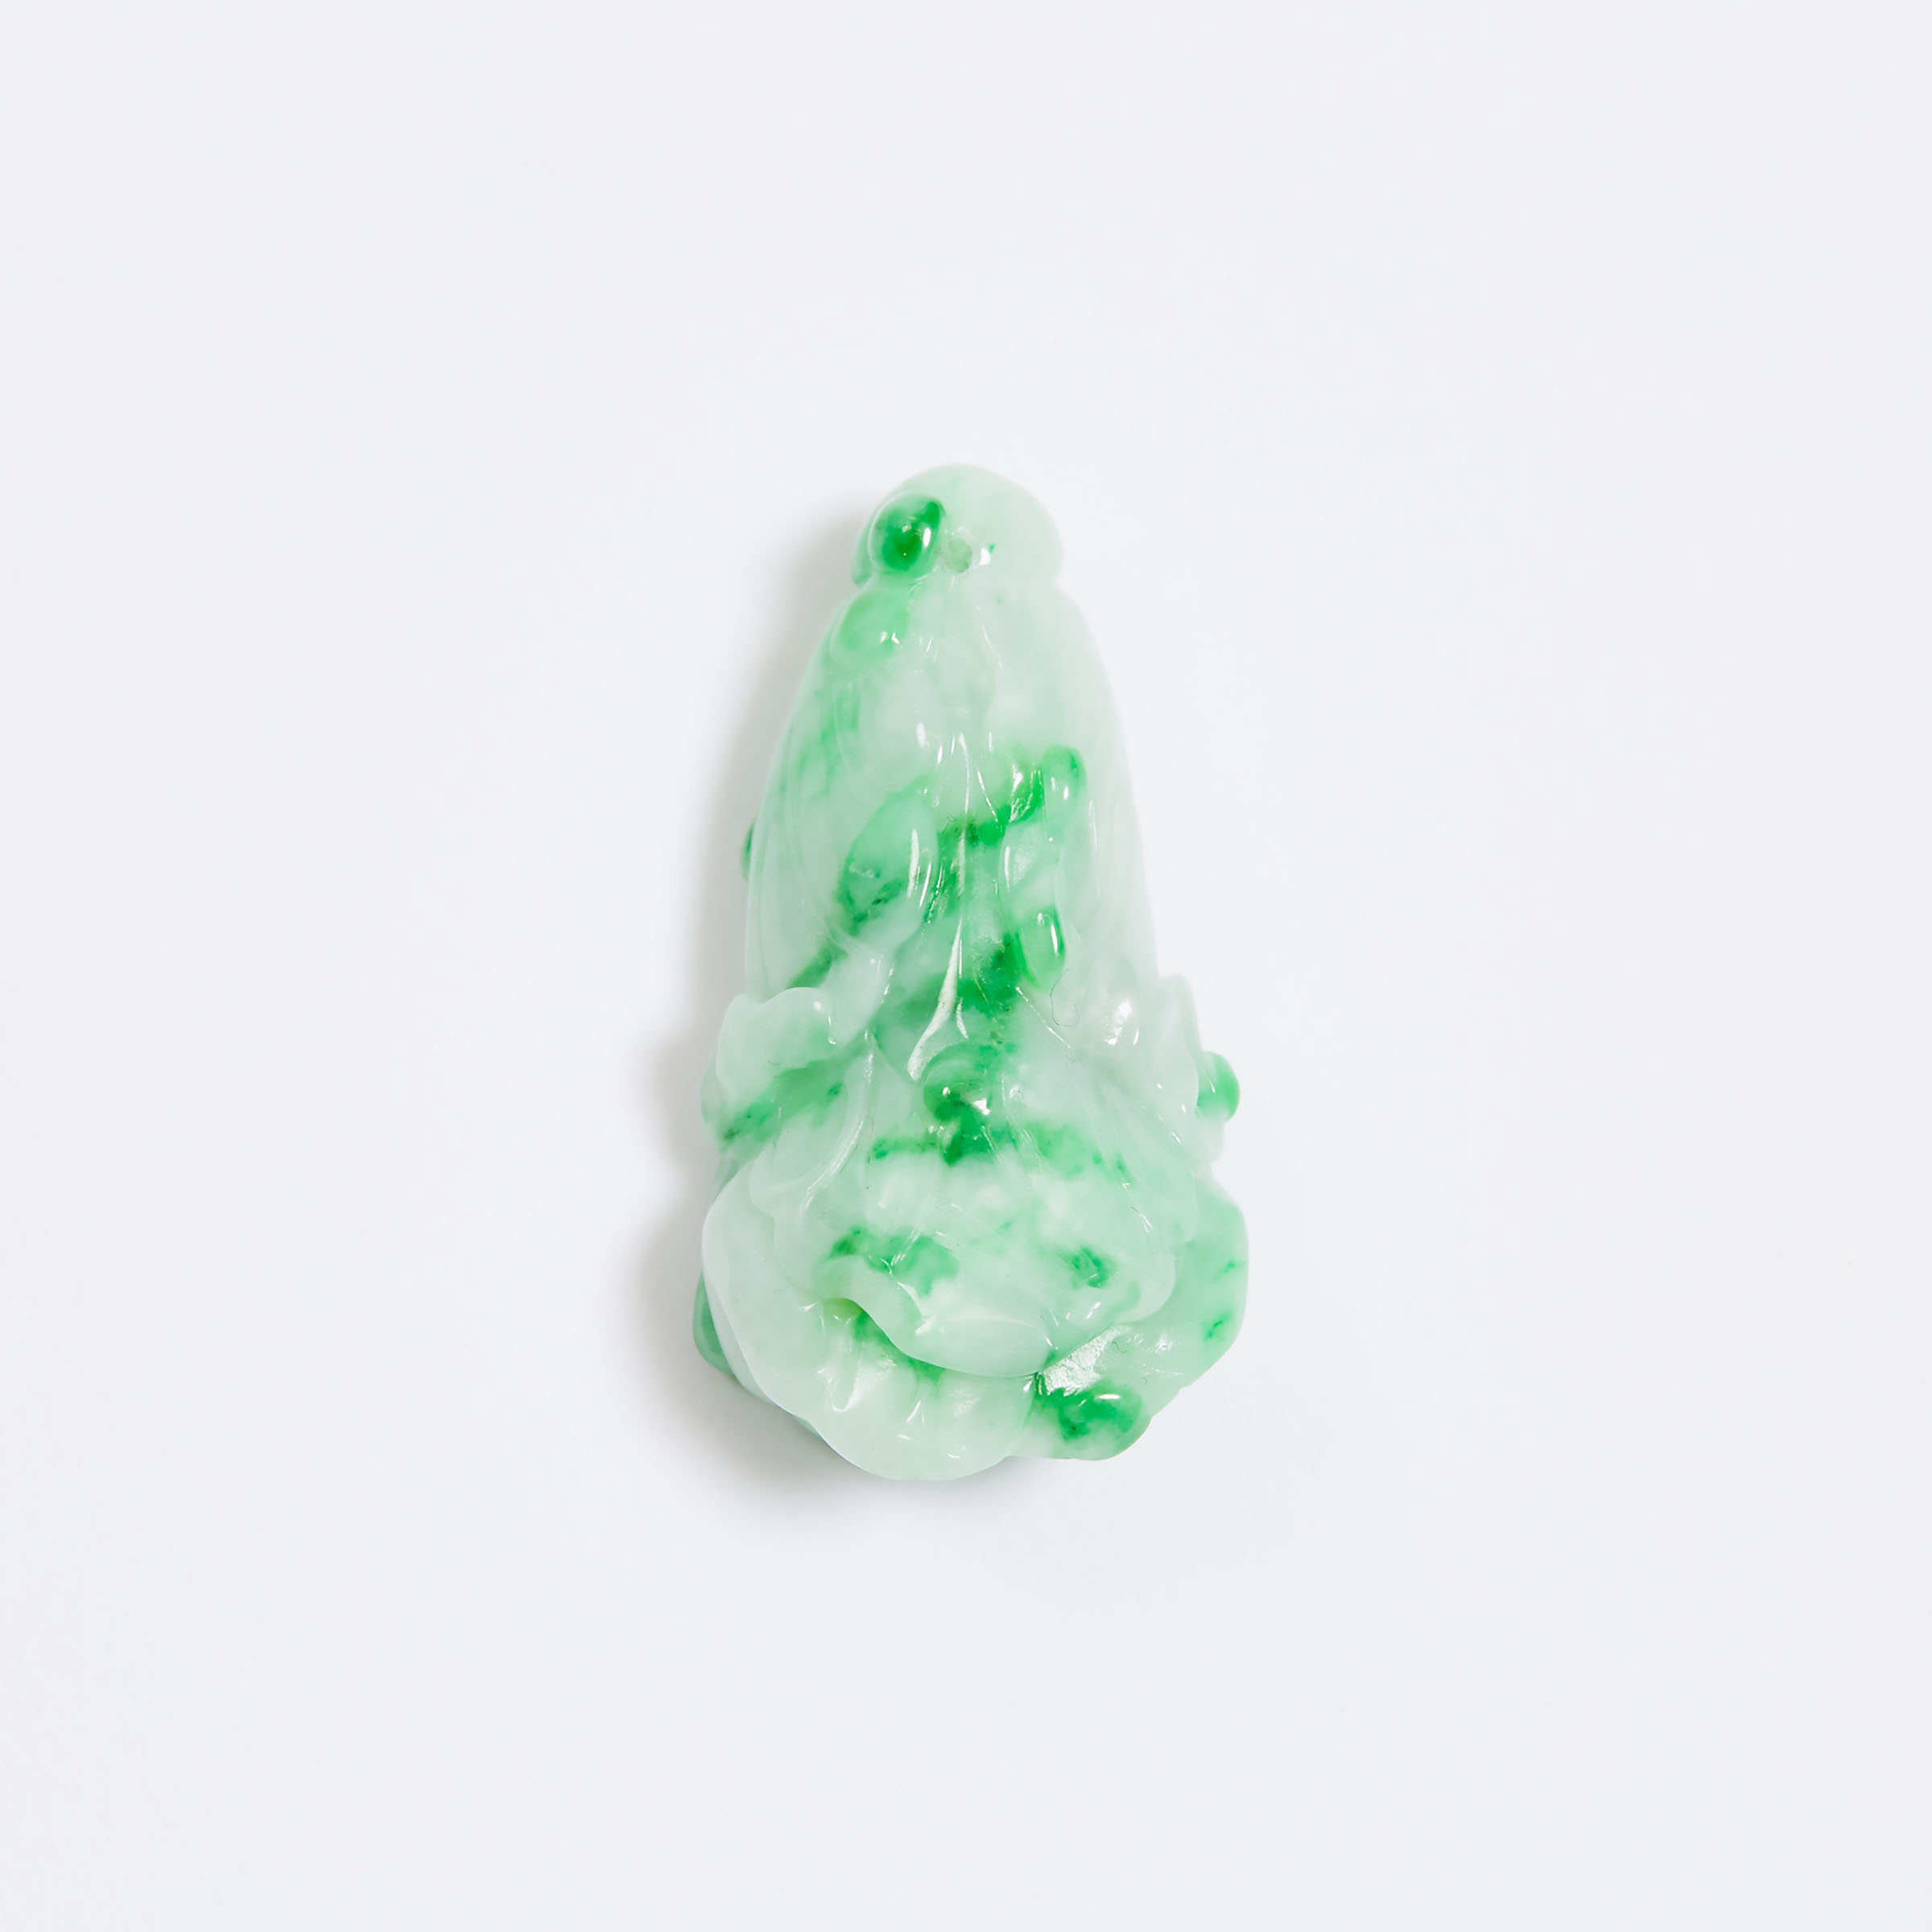 A Natural Jadeite Cabbage 'Hundred Fortune' Pendant